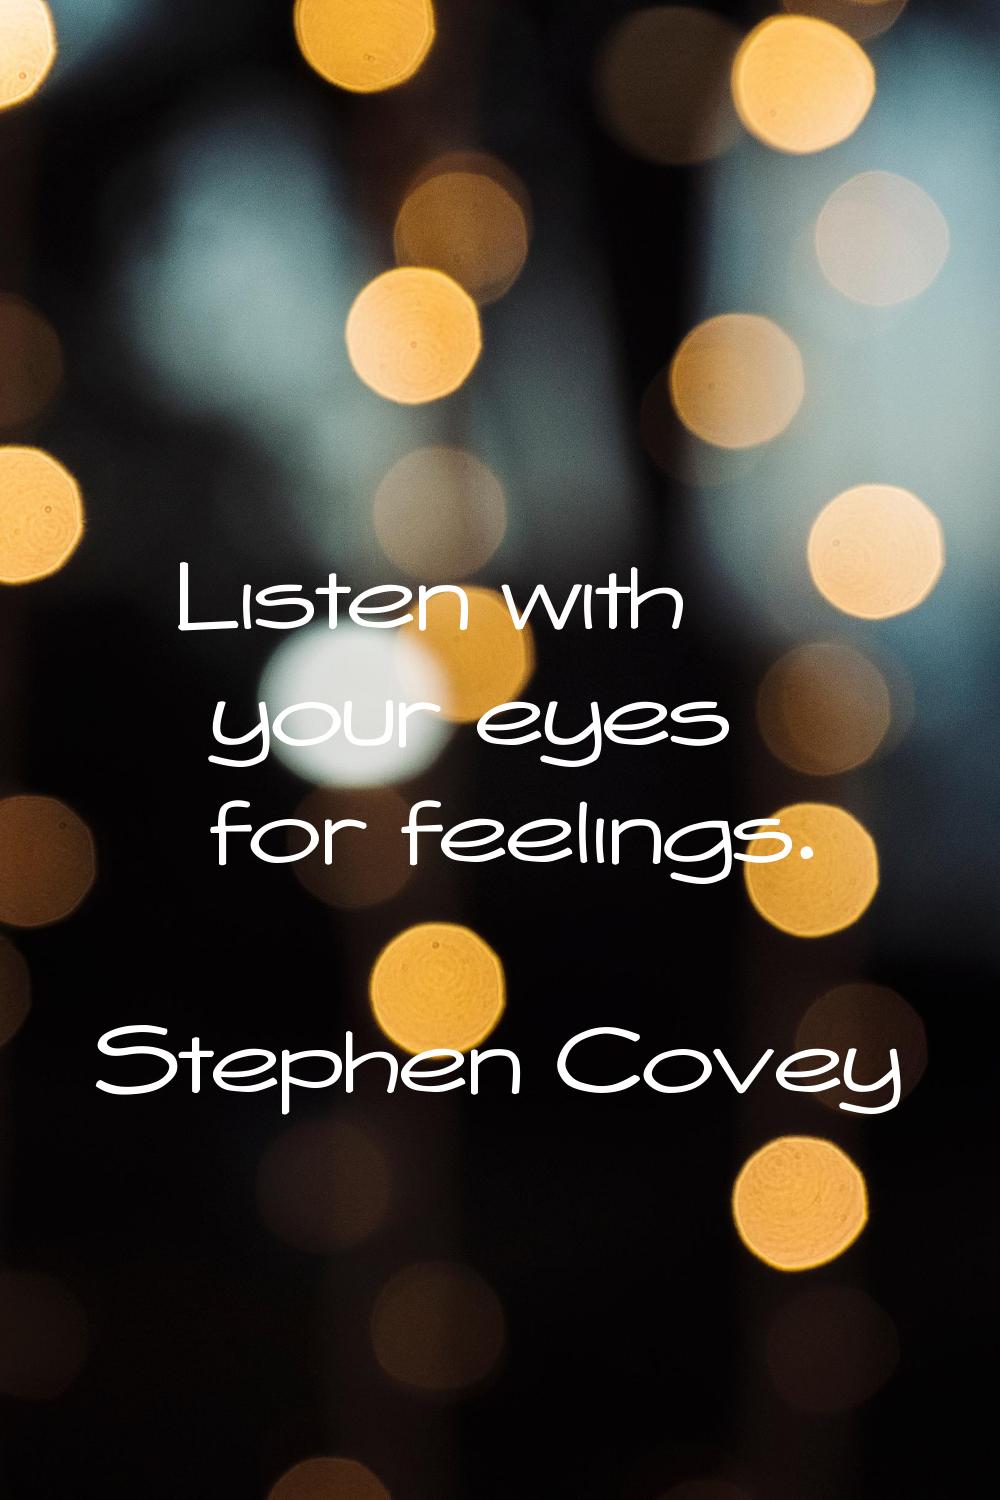 Listen with your eyes for feelings.